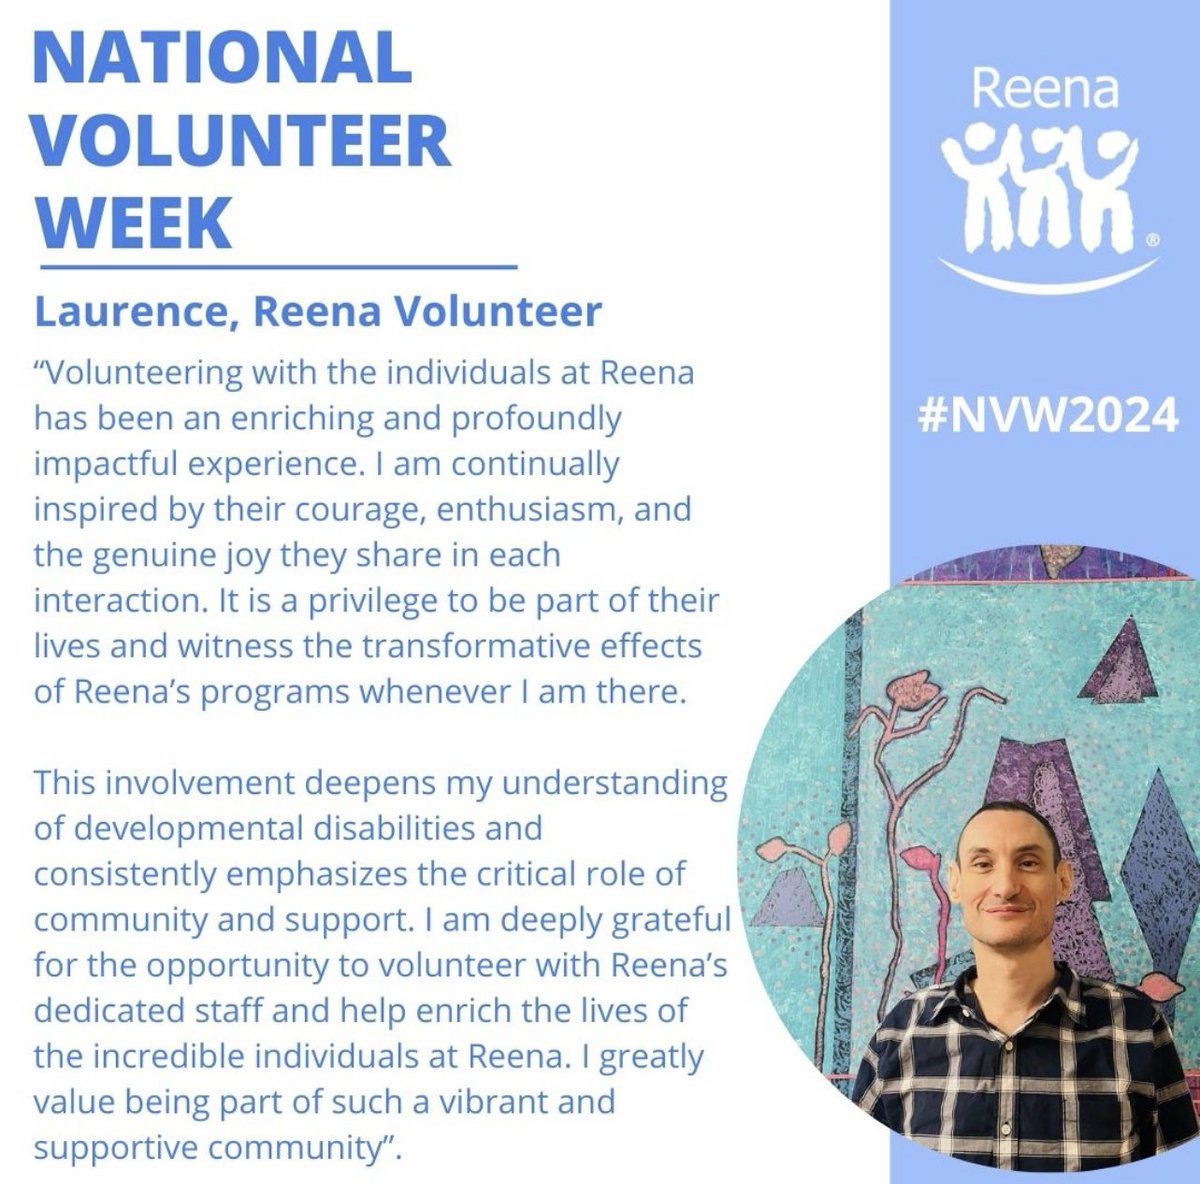 During #NationalVolunteerWeek, we celebrate the dedication and passion of volunteers like Laurence who generously give their time to make a difference. Thank you for sharing your inspiring journey with #ReenaFoundation! #NVW2024 #EveryMomentMatters